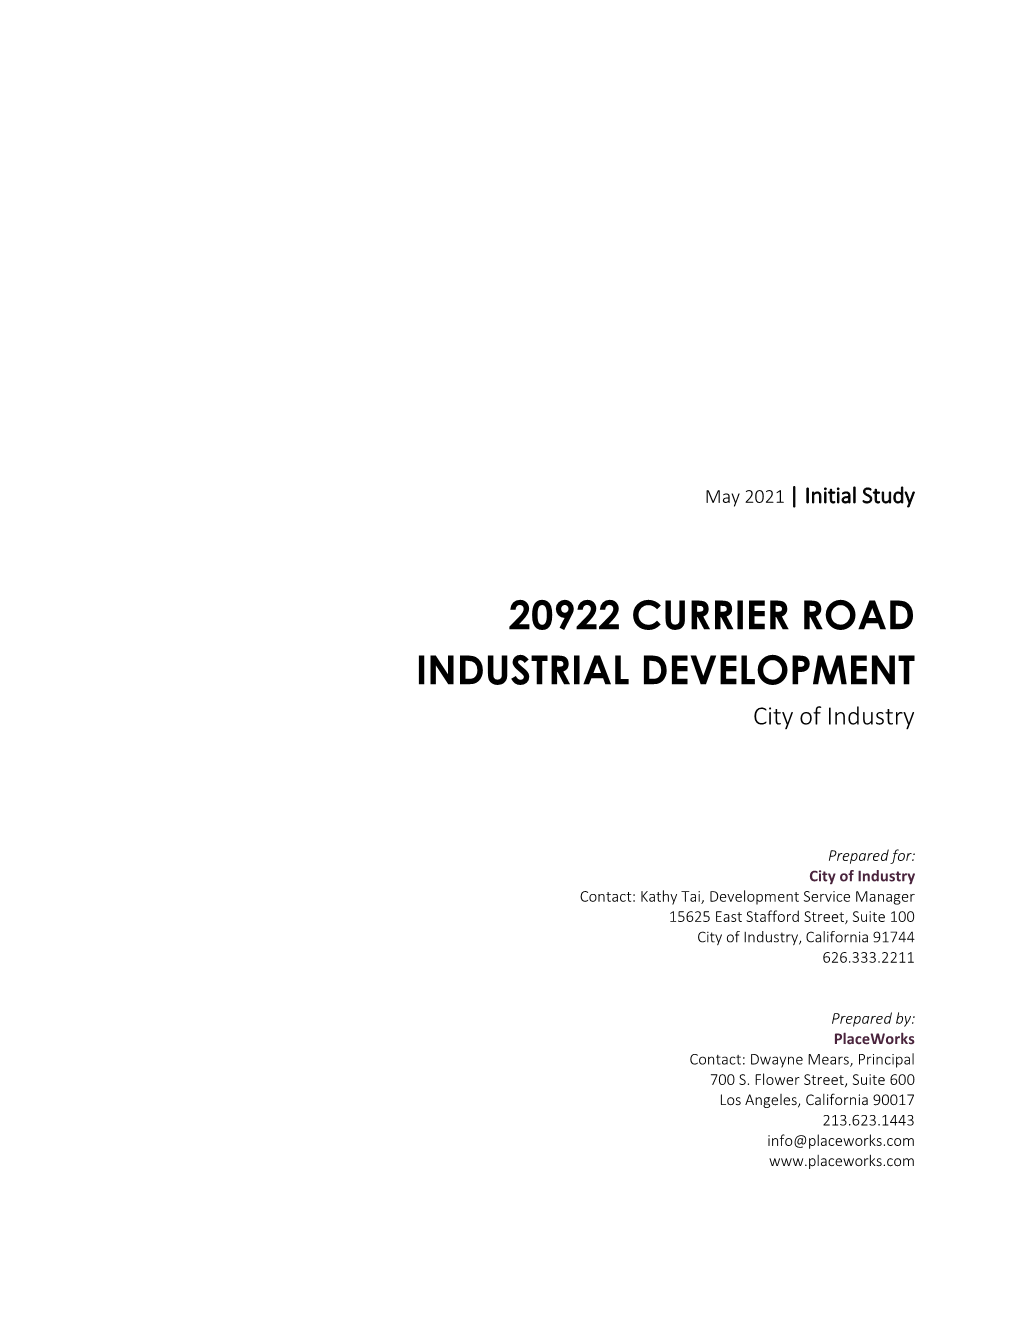 20922 CURRIER ROAD INDUSTRIAL DEVELOPMENT City of Industry